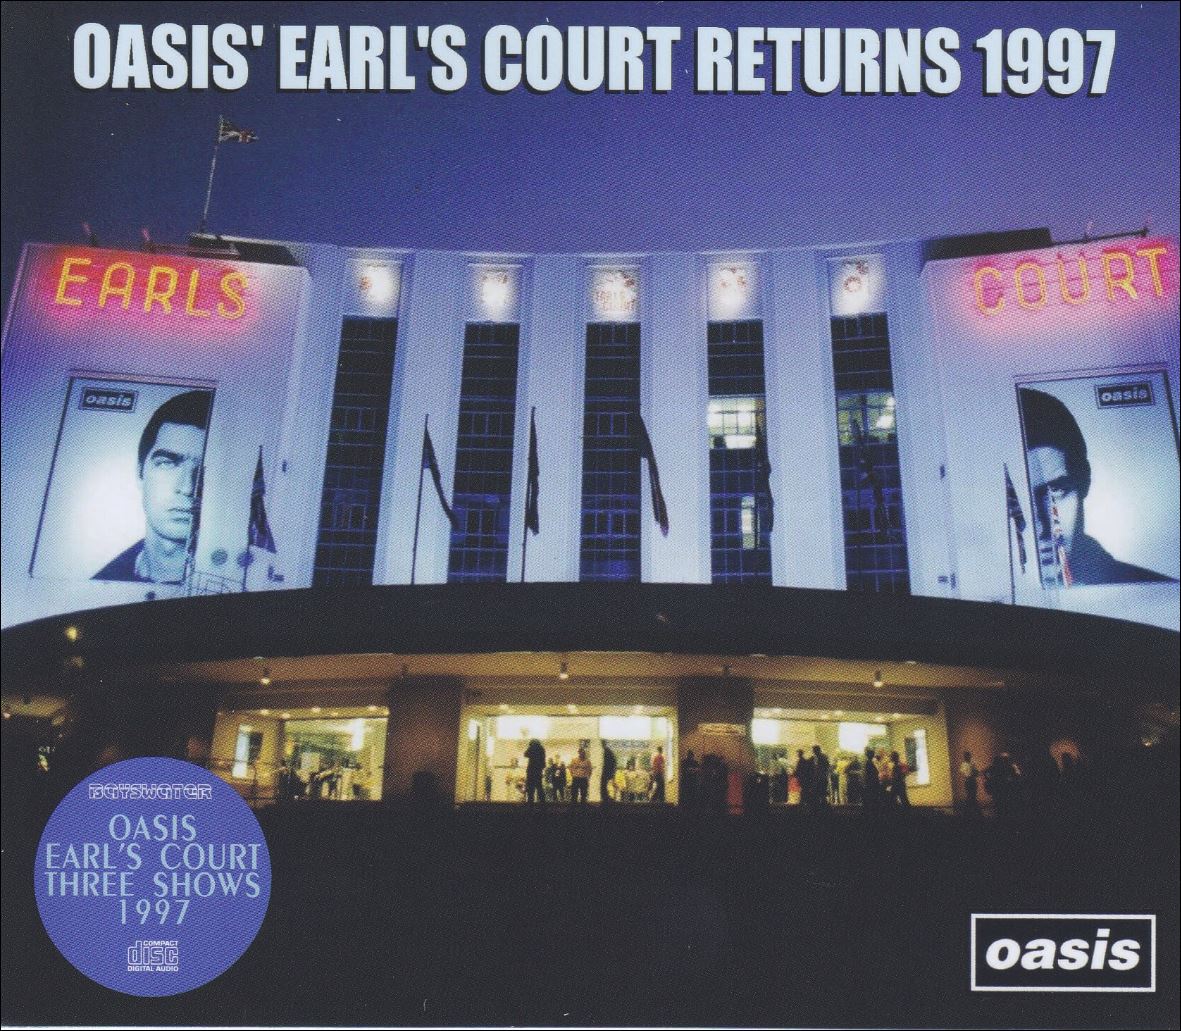 Oasis' Earls Court Returns 1997 (Bayswater, bw-097-102)